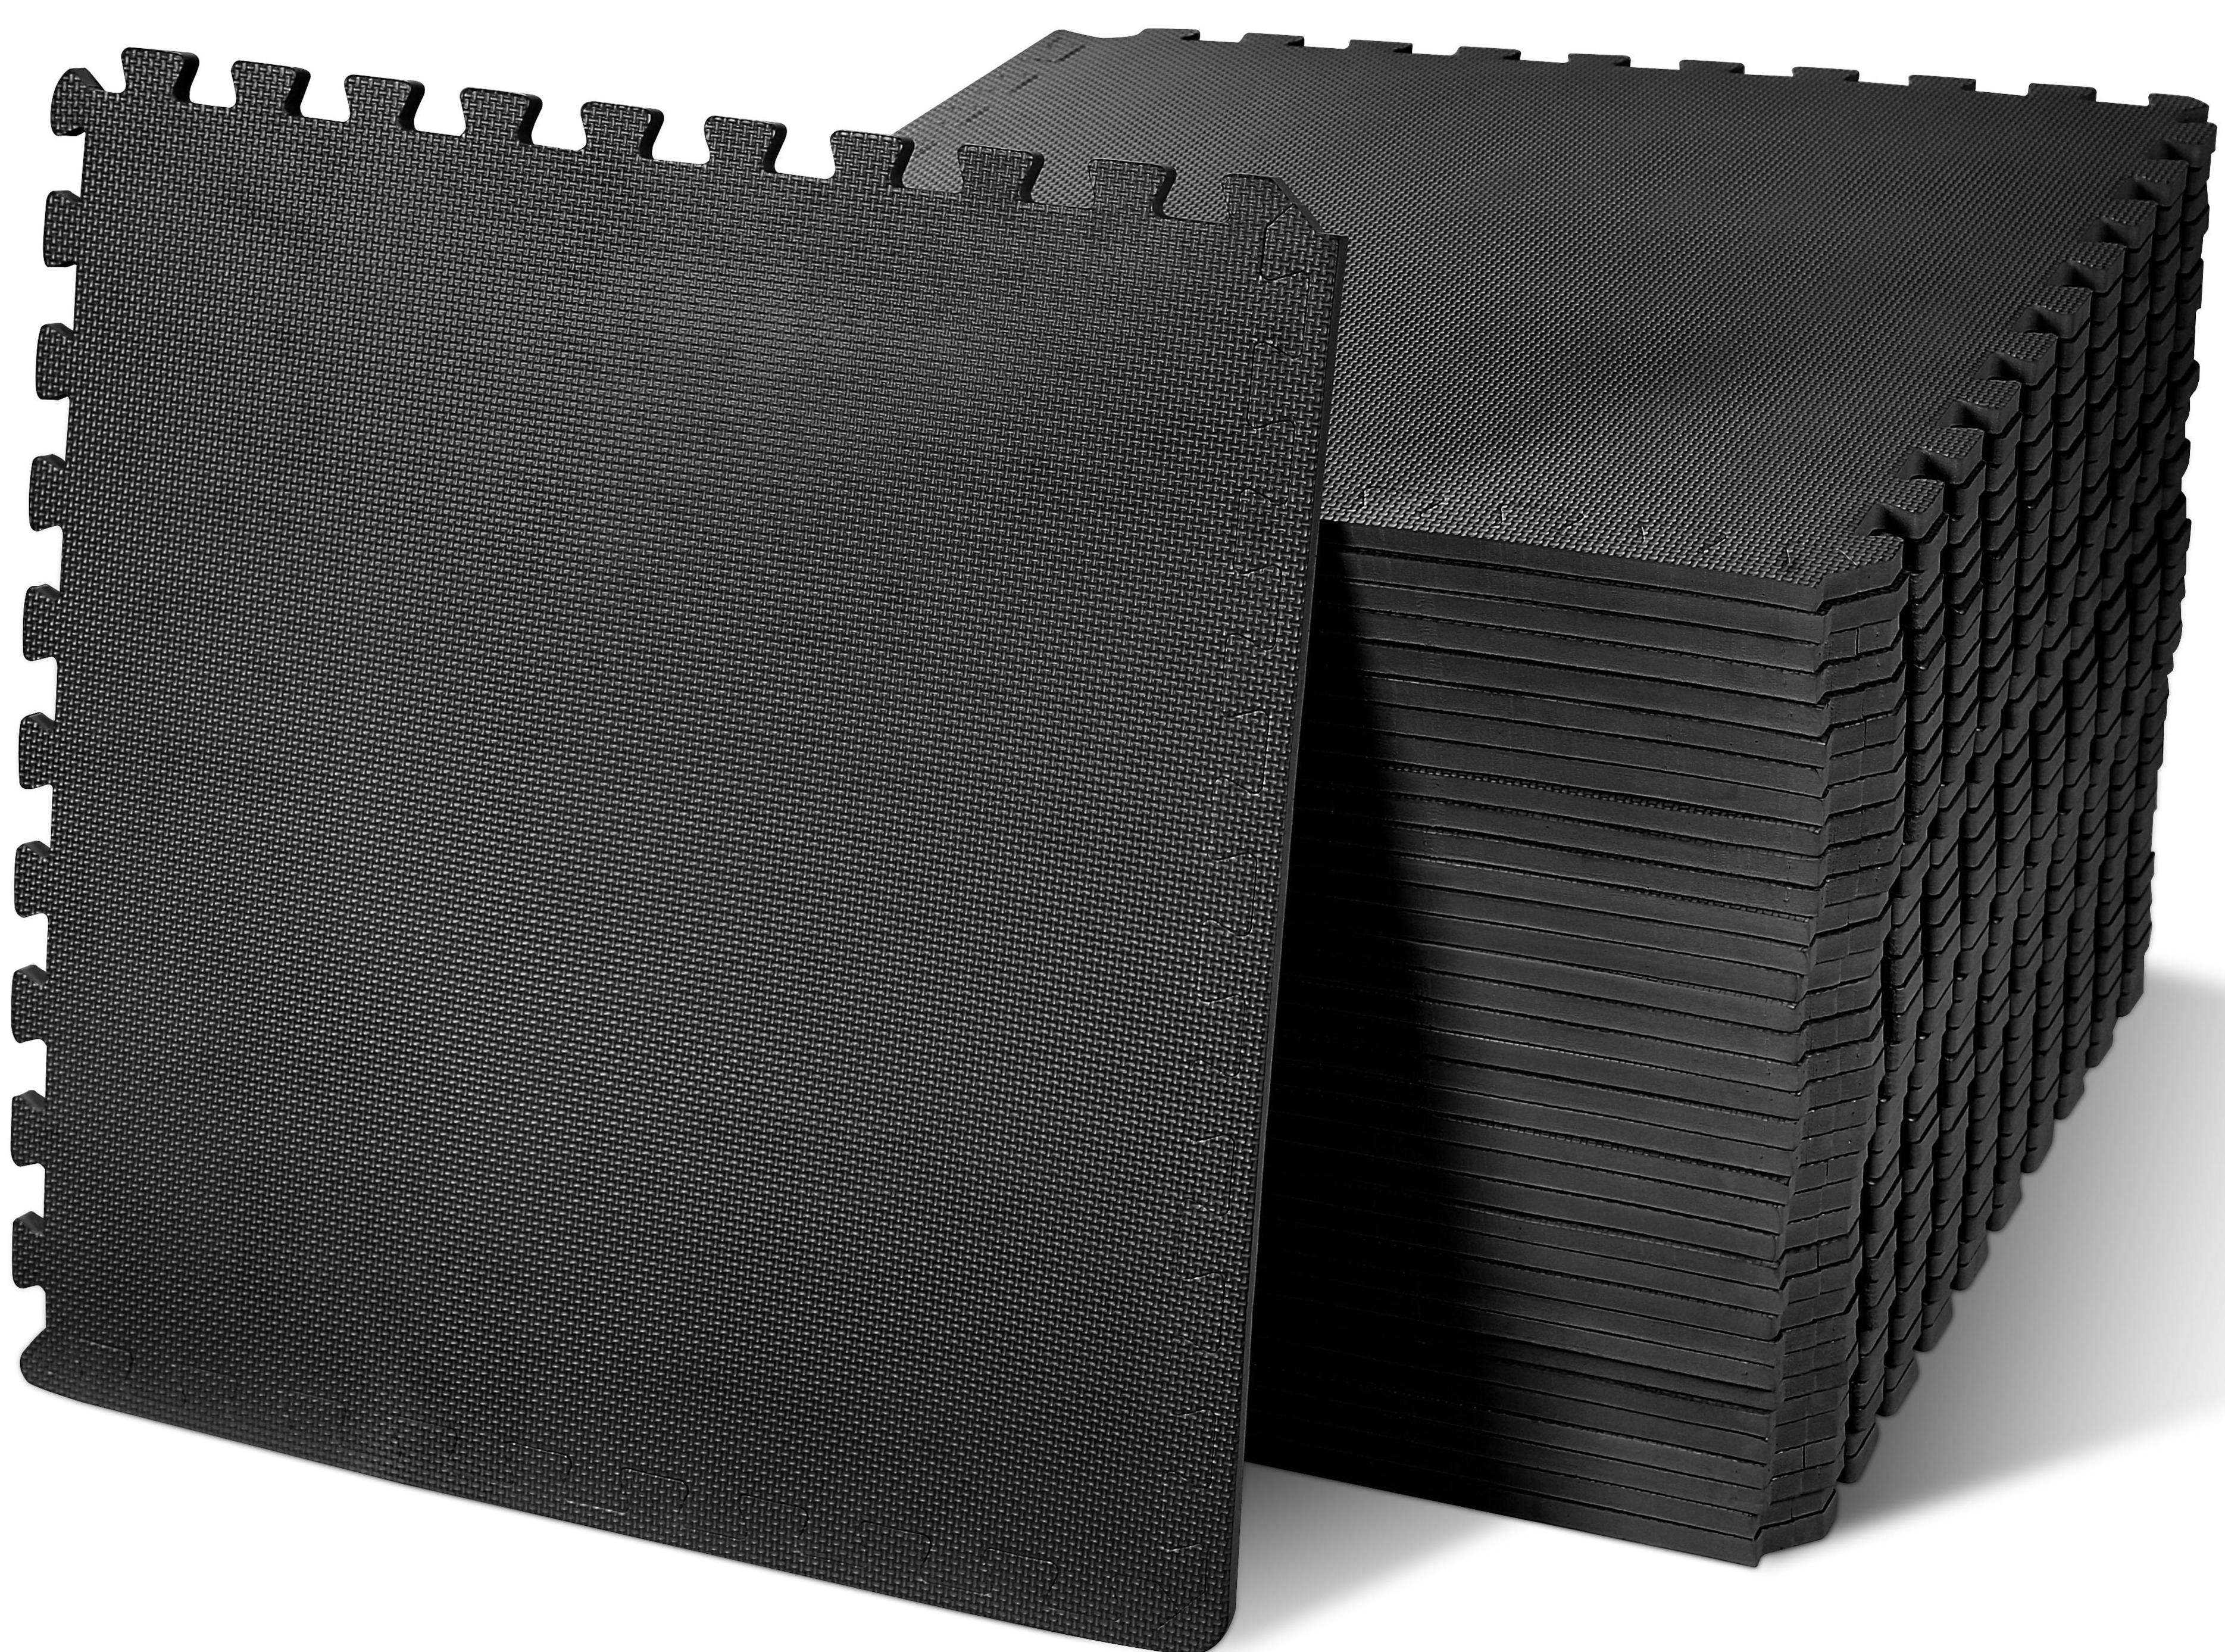 36-Pc BalanceFrom 1/2" Thick EVA Foam Puzzle Exercise Mat (144 Sq Ft., Black) - $60 + Free Shipping